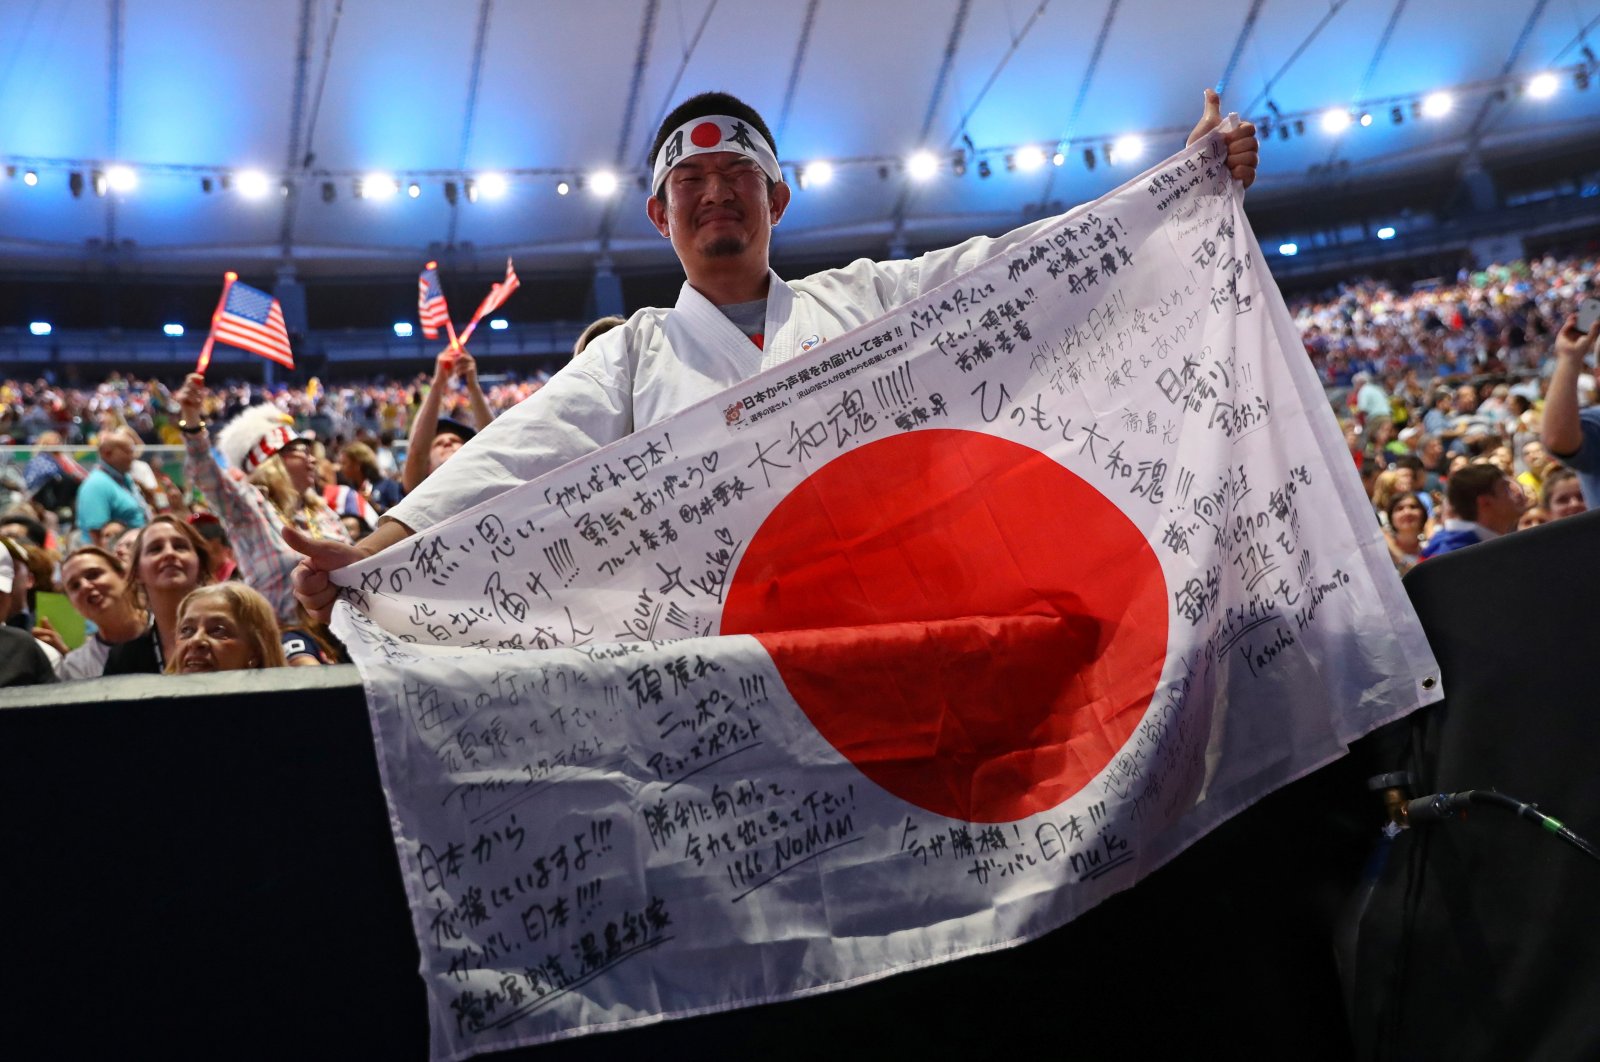 Kazunori Takishima is pictured before the opening ceremony of the Rio 2016 Olympic Games in Rio de Janeiro, Brazil, Aug. 5, 2016. (Reuters Photo)